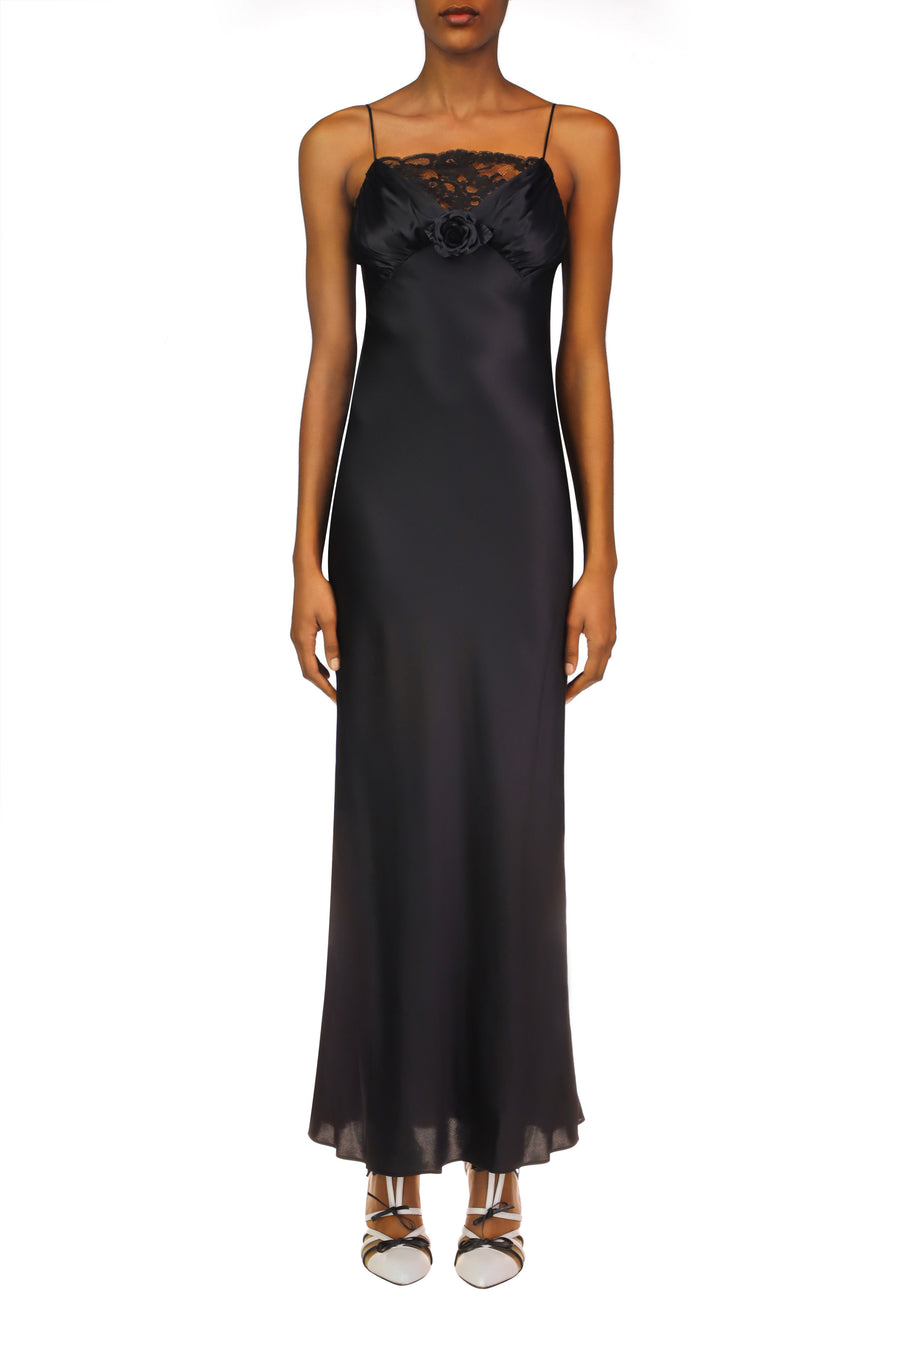 Black Silk Satin Bias Dress With Ruched Bust And Black Lace Detail